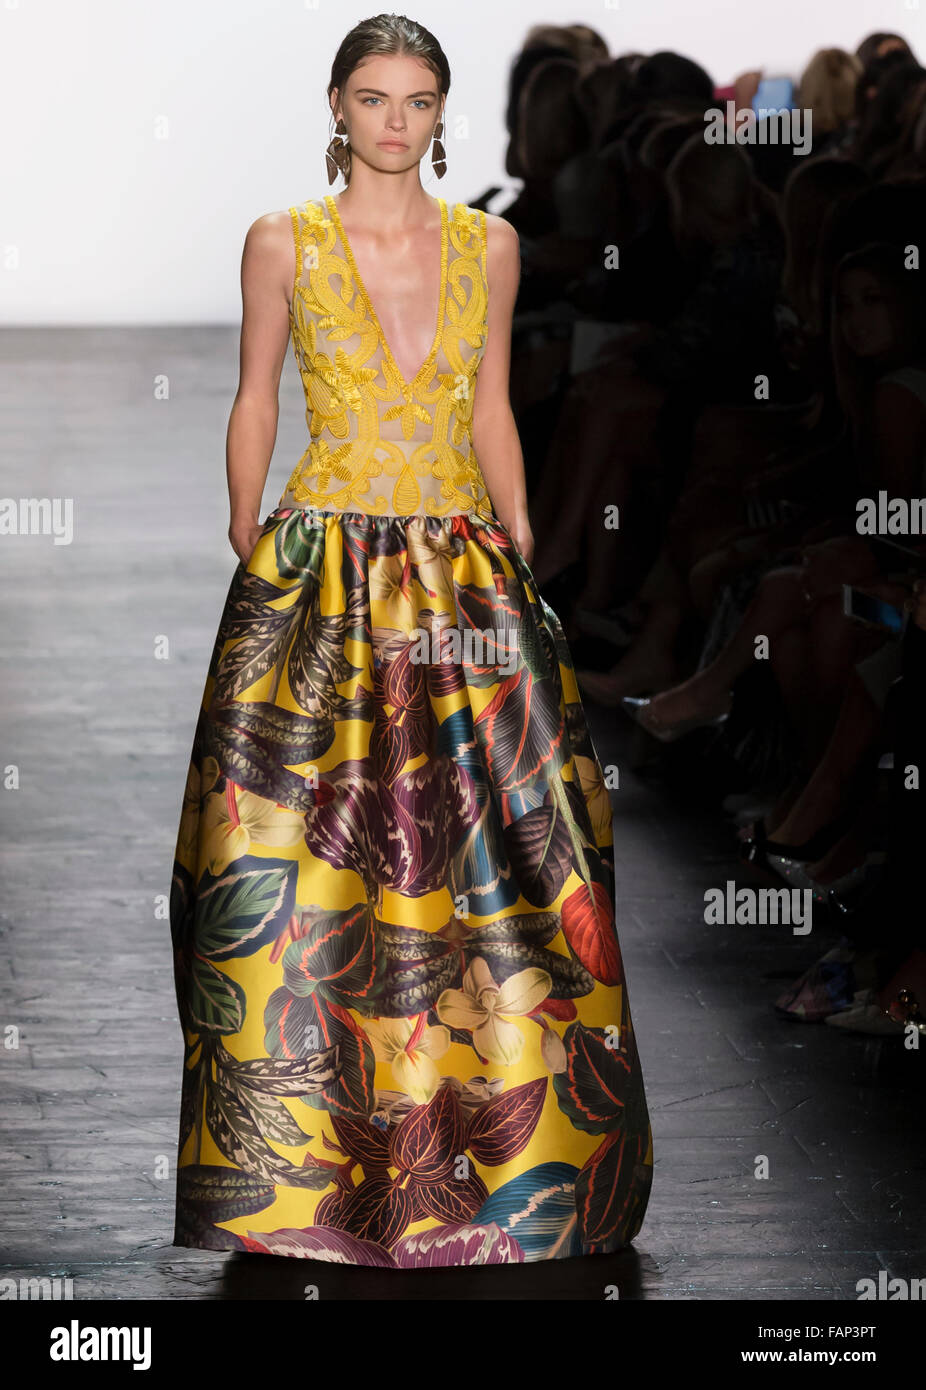 New York, NY - September 15, 2015: Grace Plowden walks the runway at the Dennis Basso fashion show during NYFW S/S 2016 Stock Photo